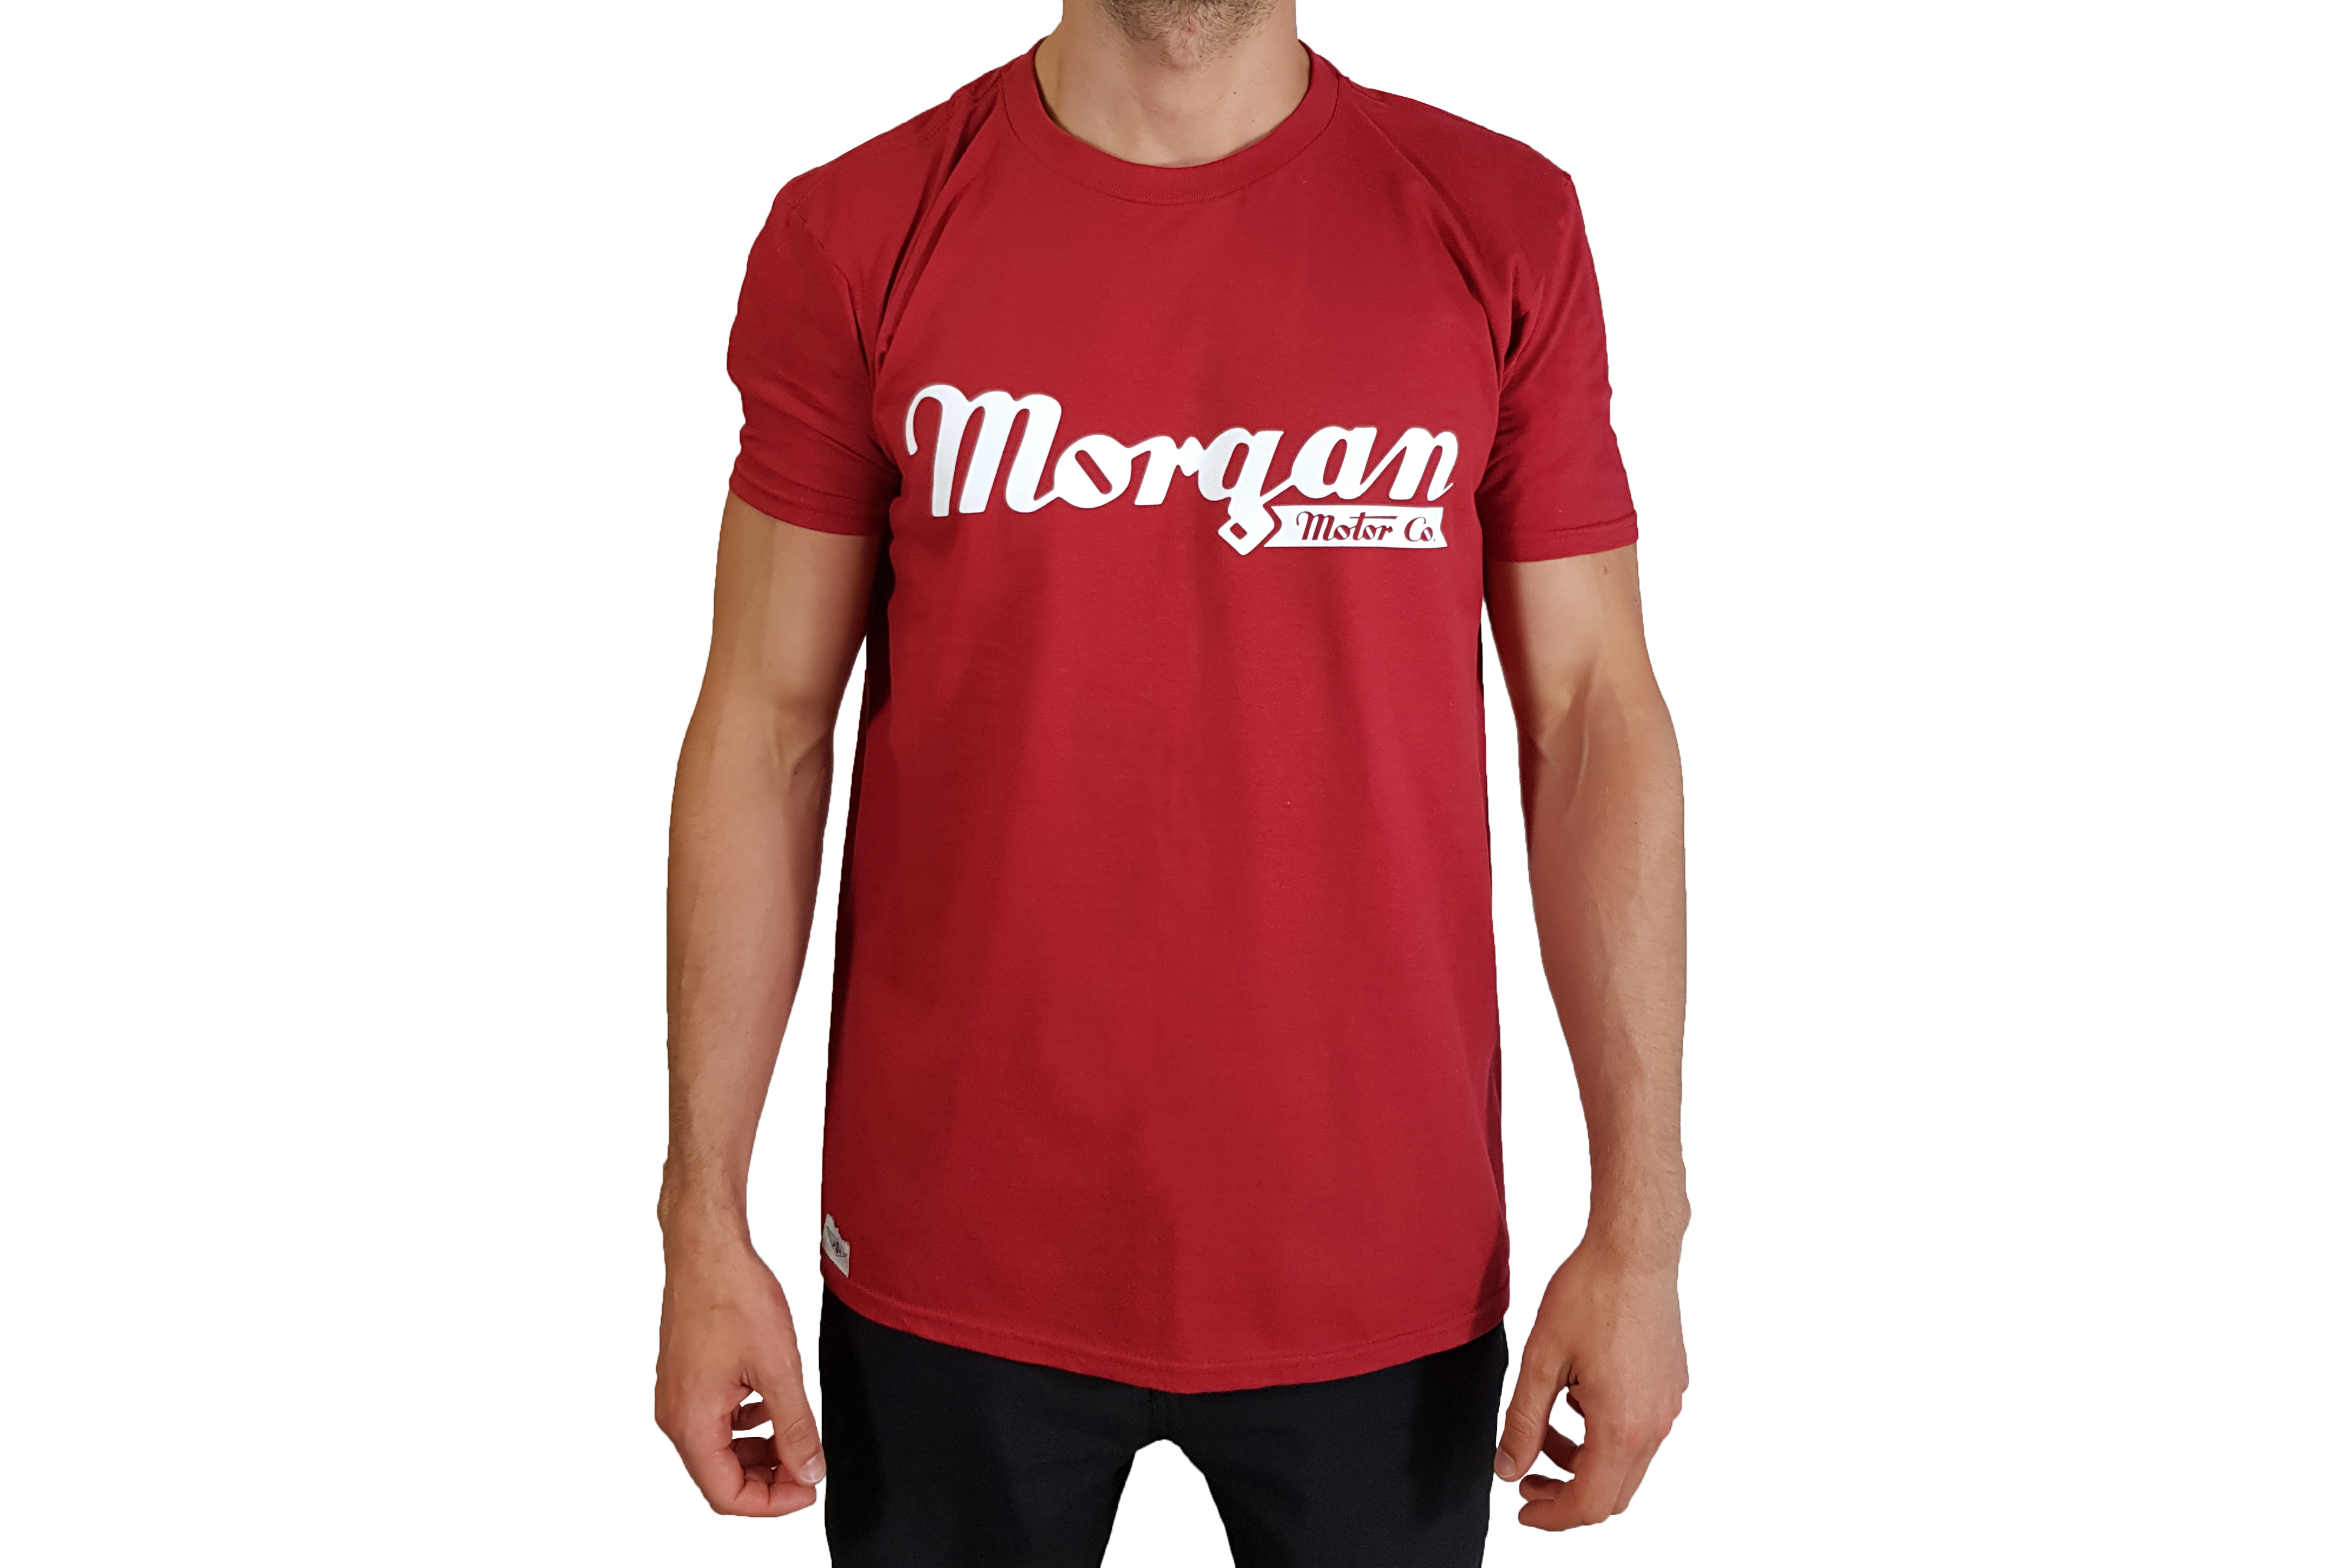 Morgan's retro t-shirt design will appeal to many